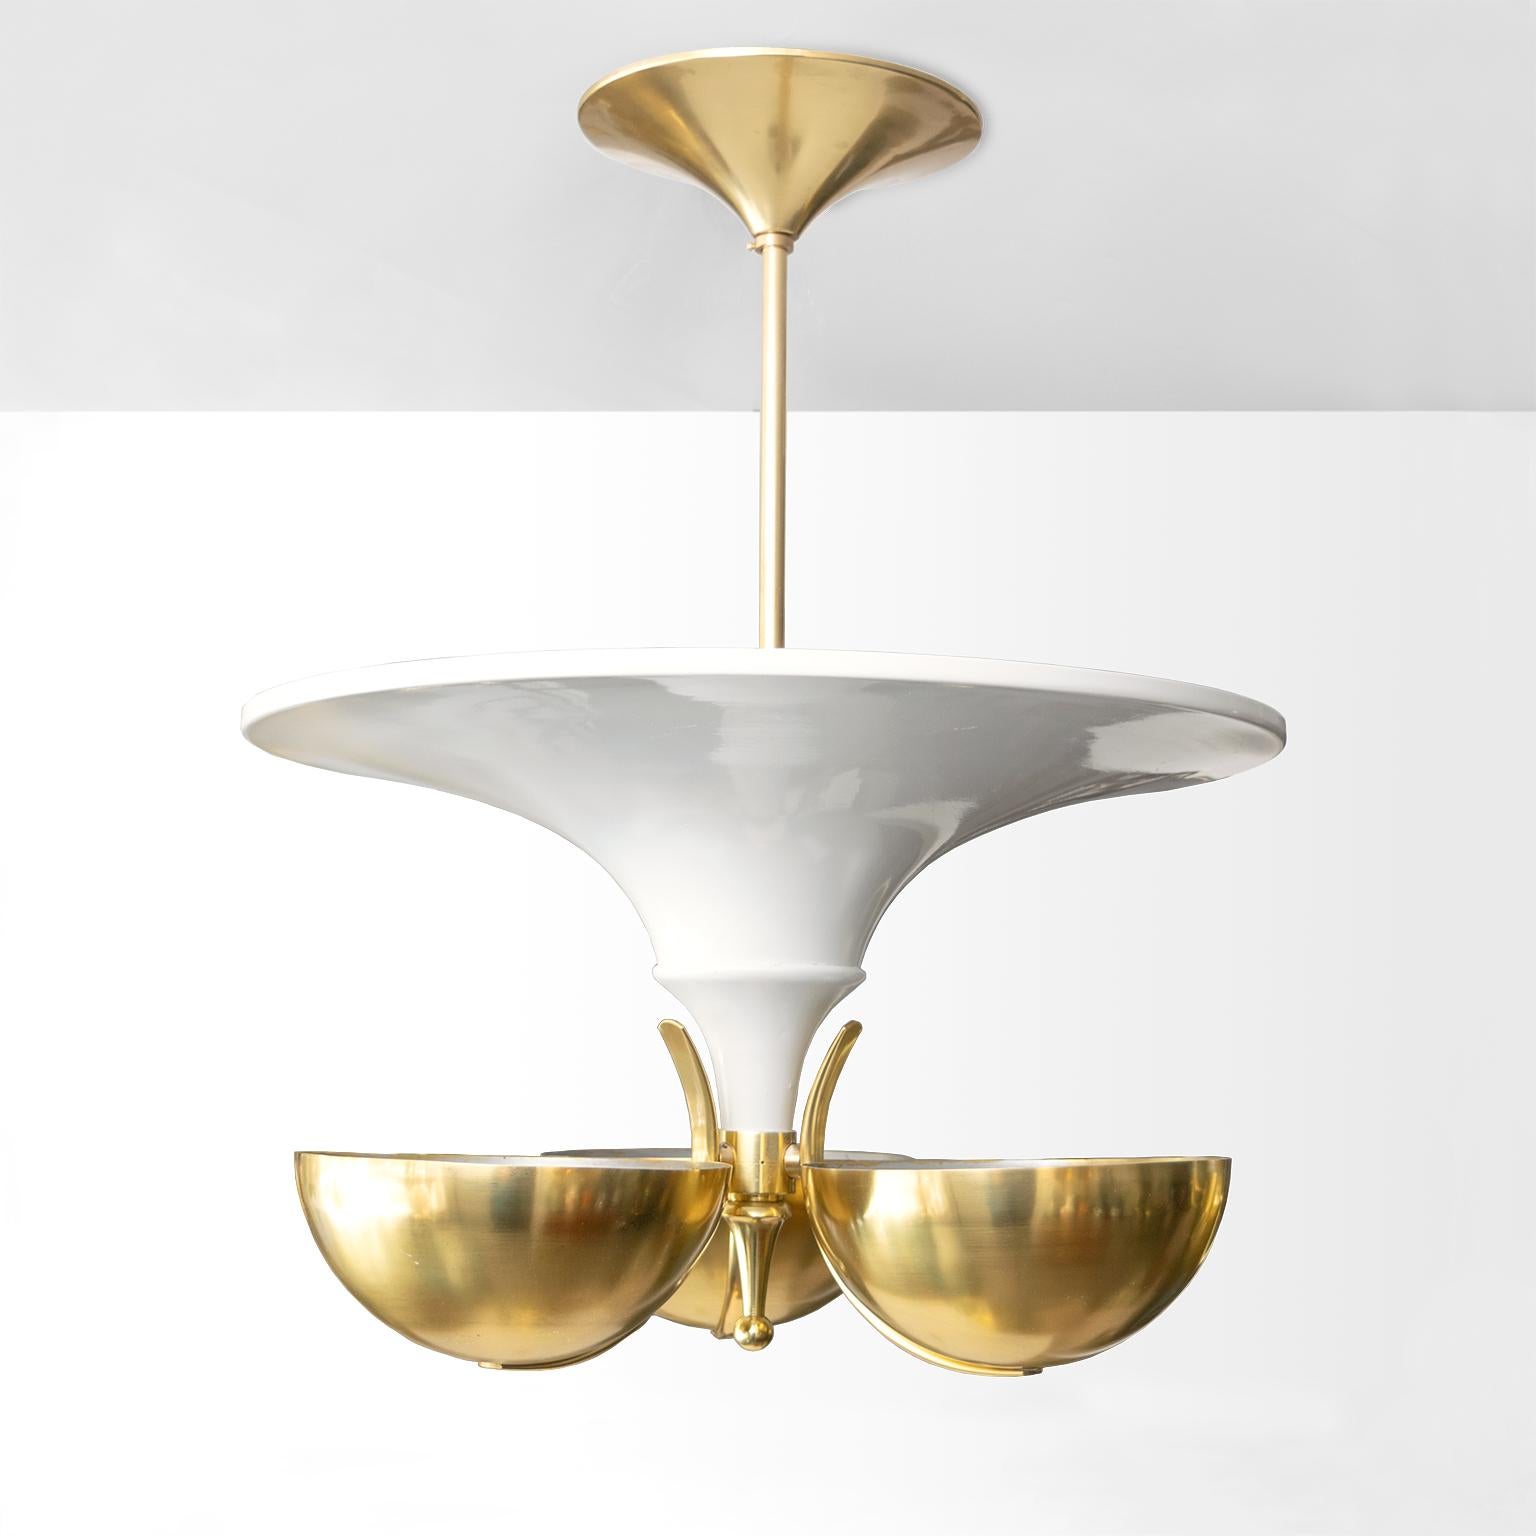 Scandinavian Modern, Swedish Art Deco chandelier with a large white lacquered reflector surrounded by 3 polished brass hemisphere shades. The reflector has 3 internal standard base sockets and the brass shades have one each. This chandelier has been